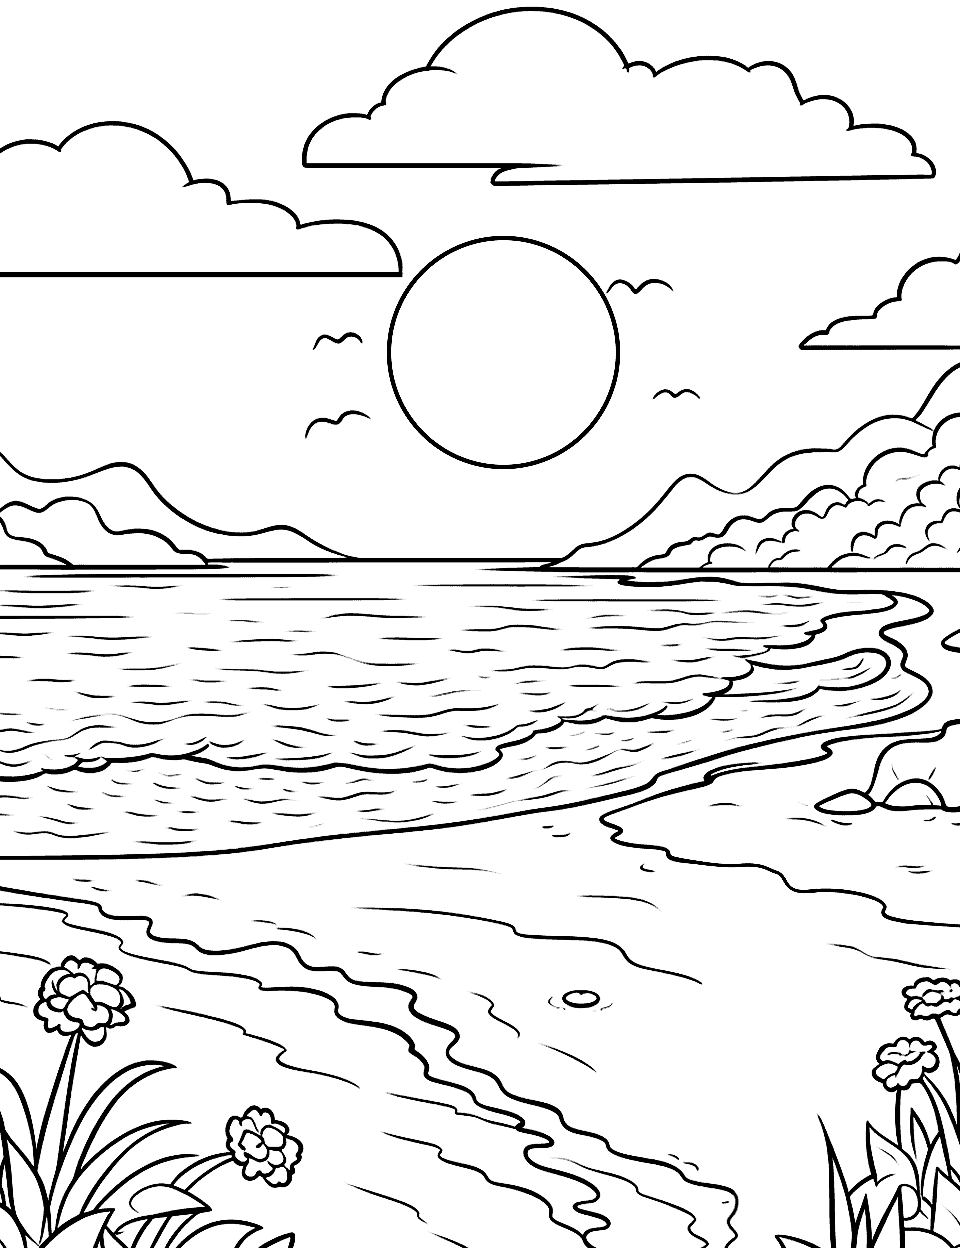 Summer Sea Beach Day Nature Coloring Page - A sunny beach scene with waves gently lapping at the sandy shore.